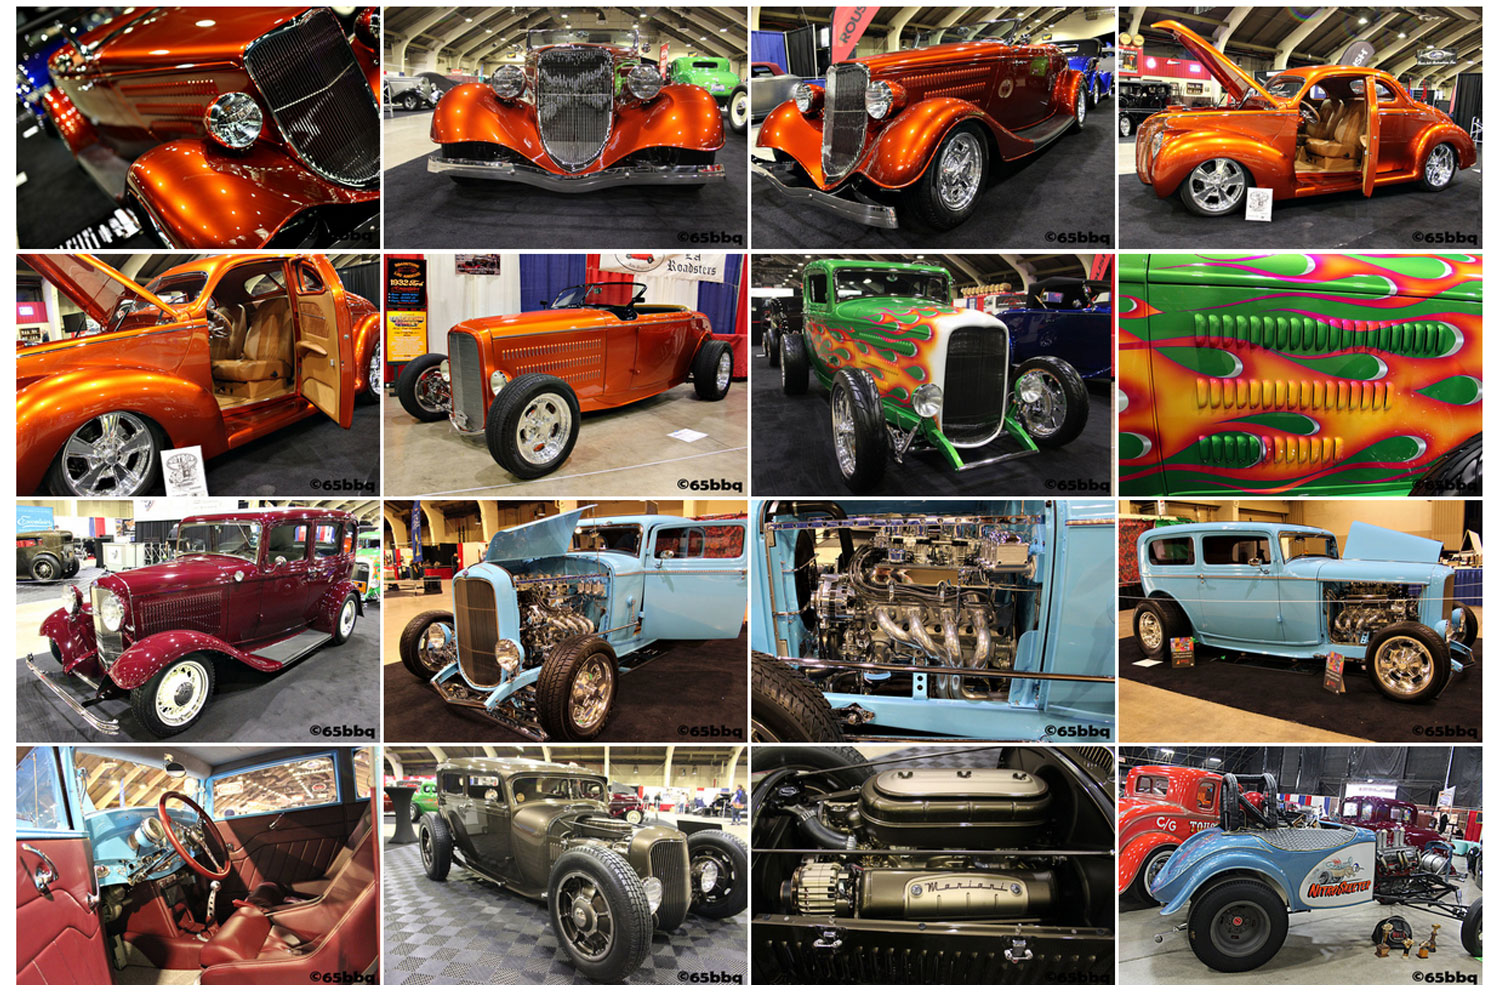 The Grand National Roadster Car Show 